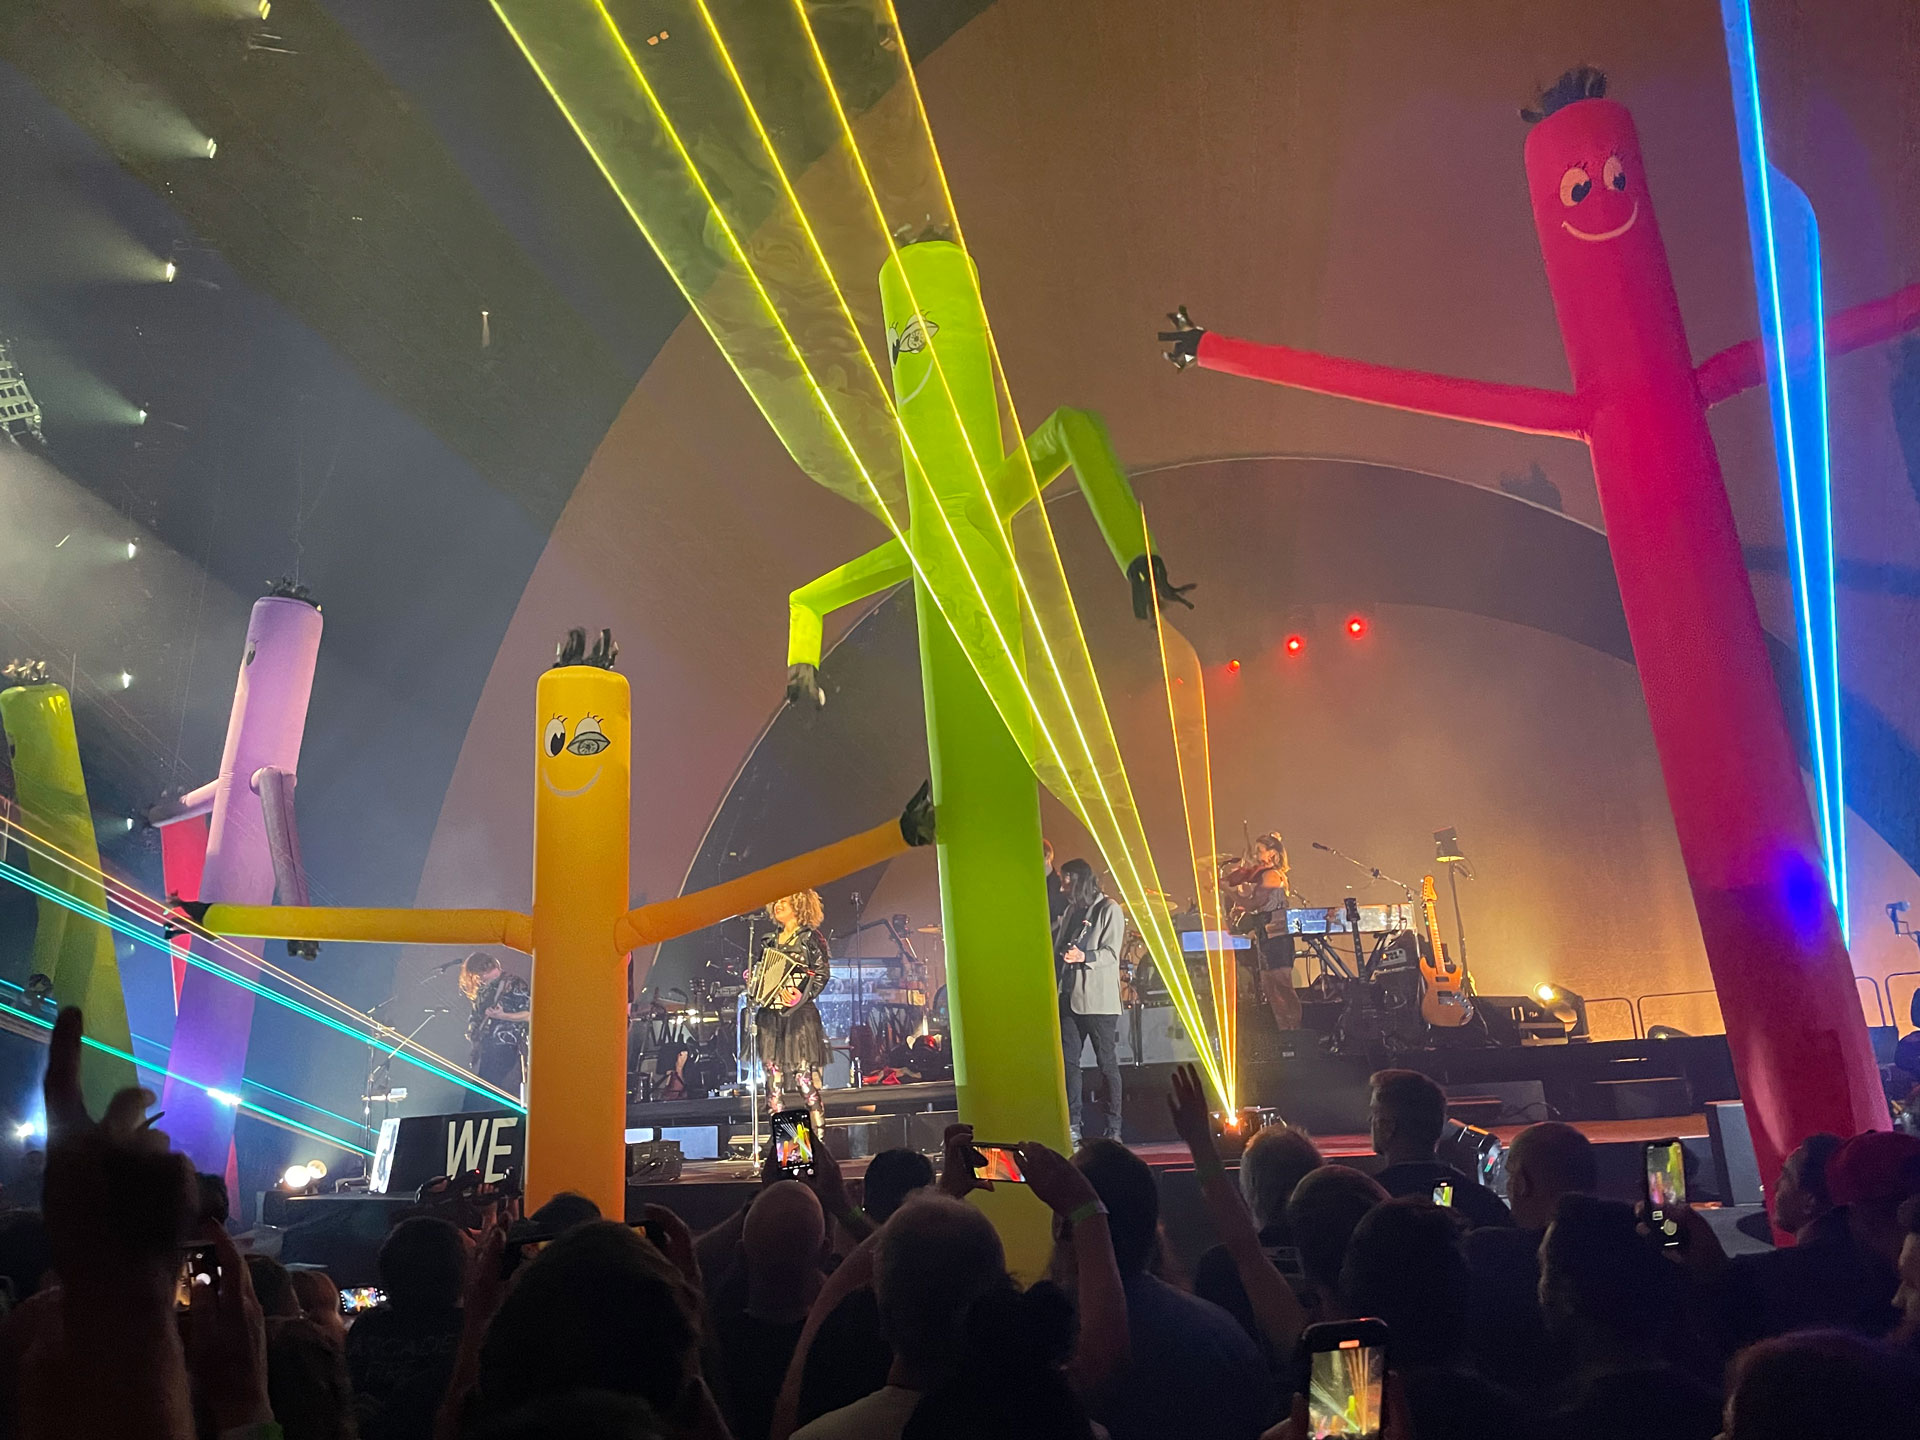 Some inflatable arm-waving tube men join Arcade Fire in Glasgow. Photo: Laura Kelly